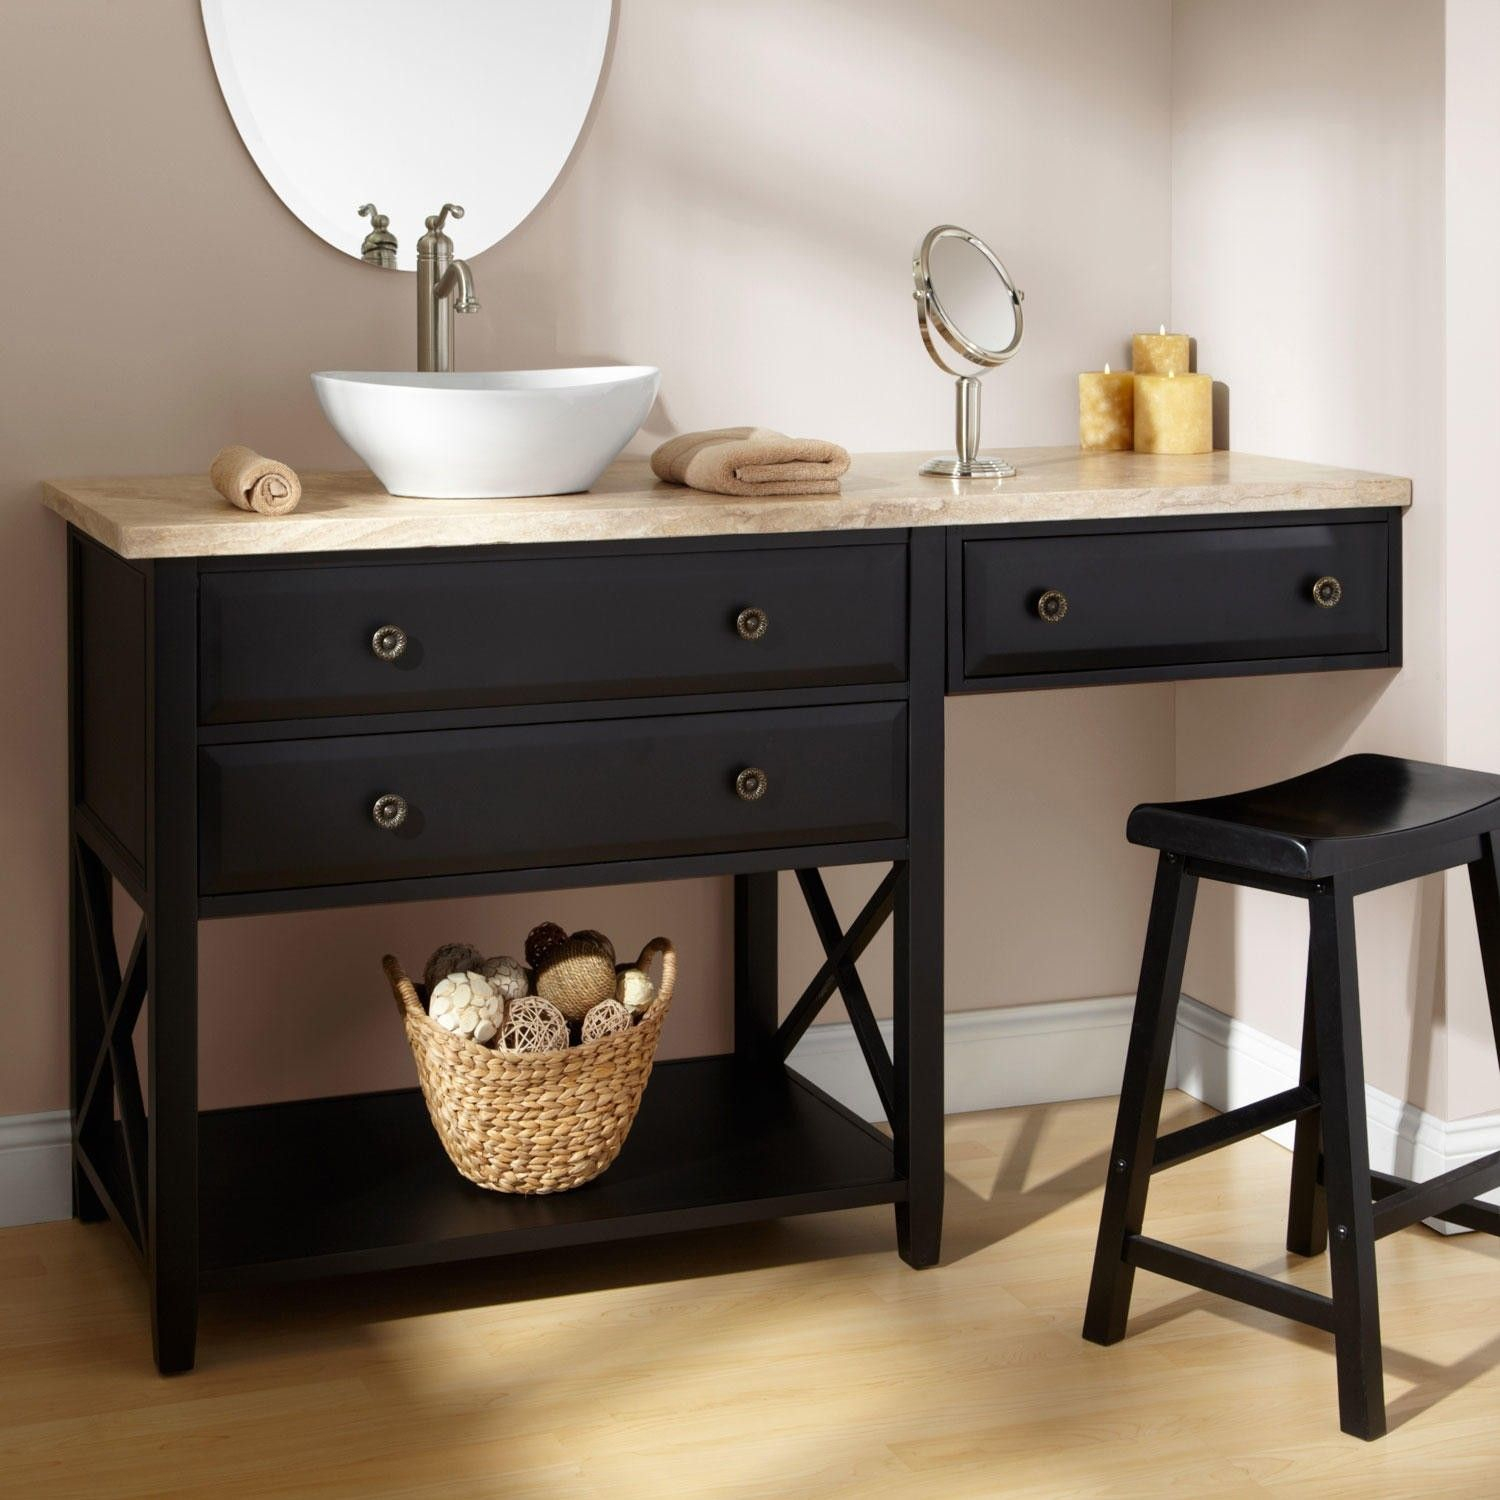 Bathroom Sink And Makeup Vanity Combo You Are Able To regarding proportions 1500 X 1500